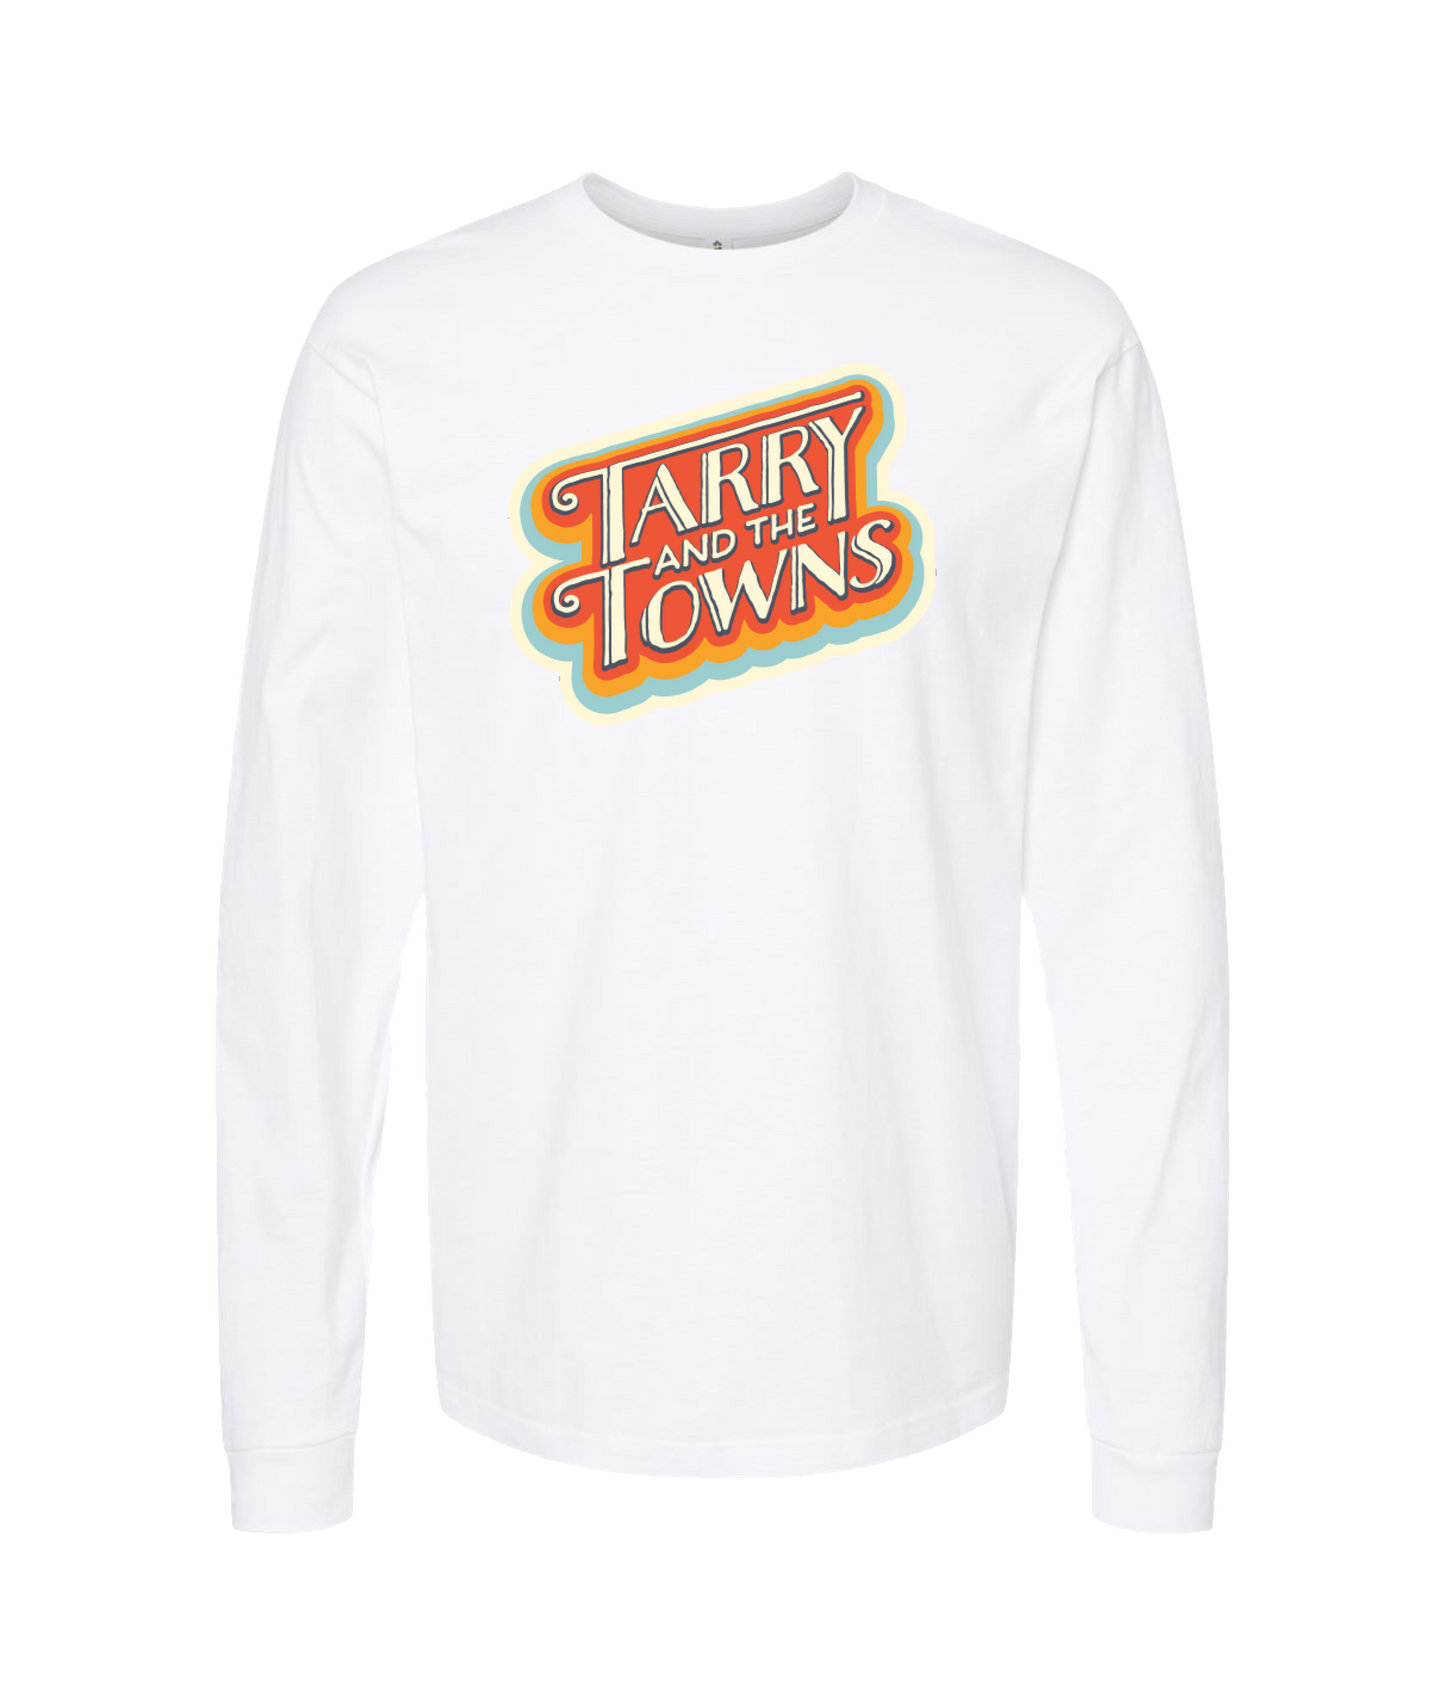 Tarry and the Towns - Vintage - White Long Sleeve T